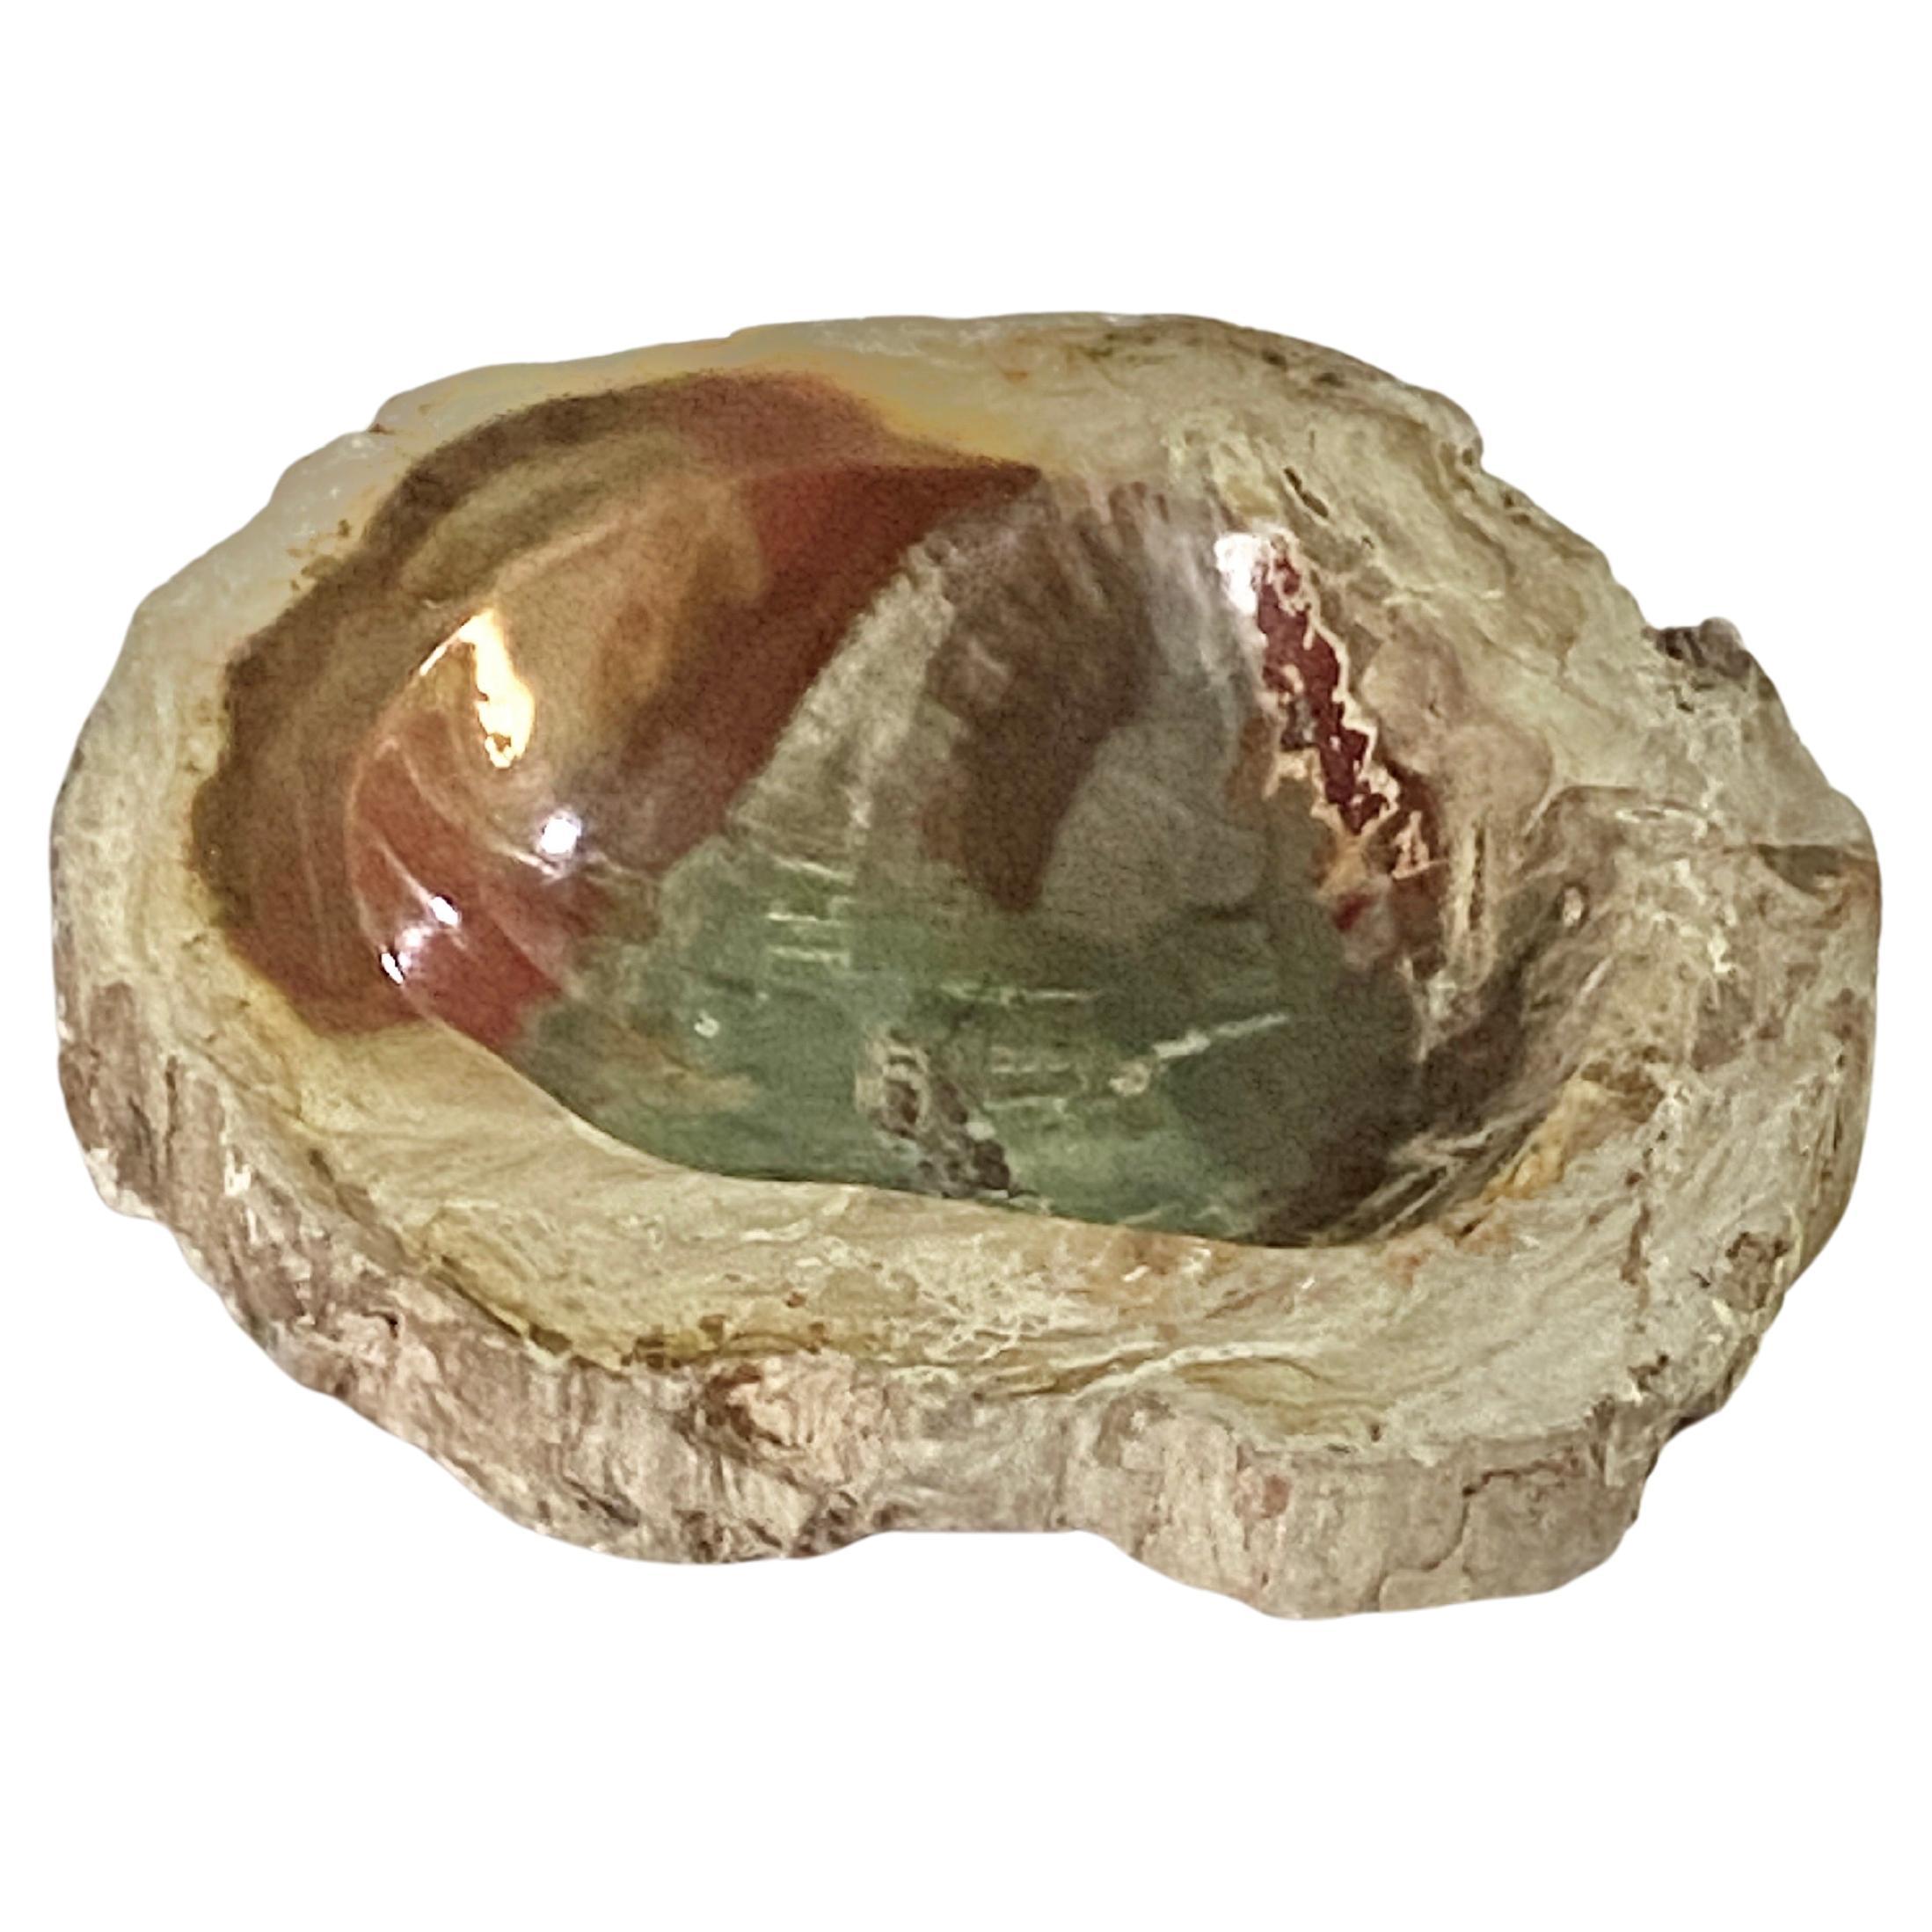 Ashtray in Petrified Wood, 15th Century and Earlier Organic Modern